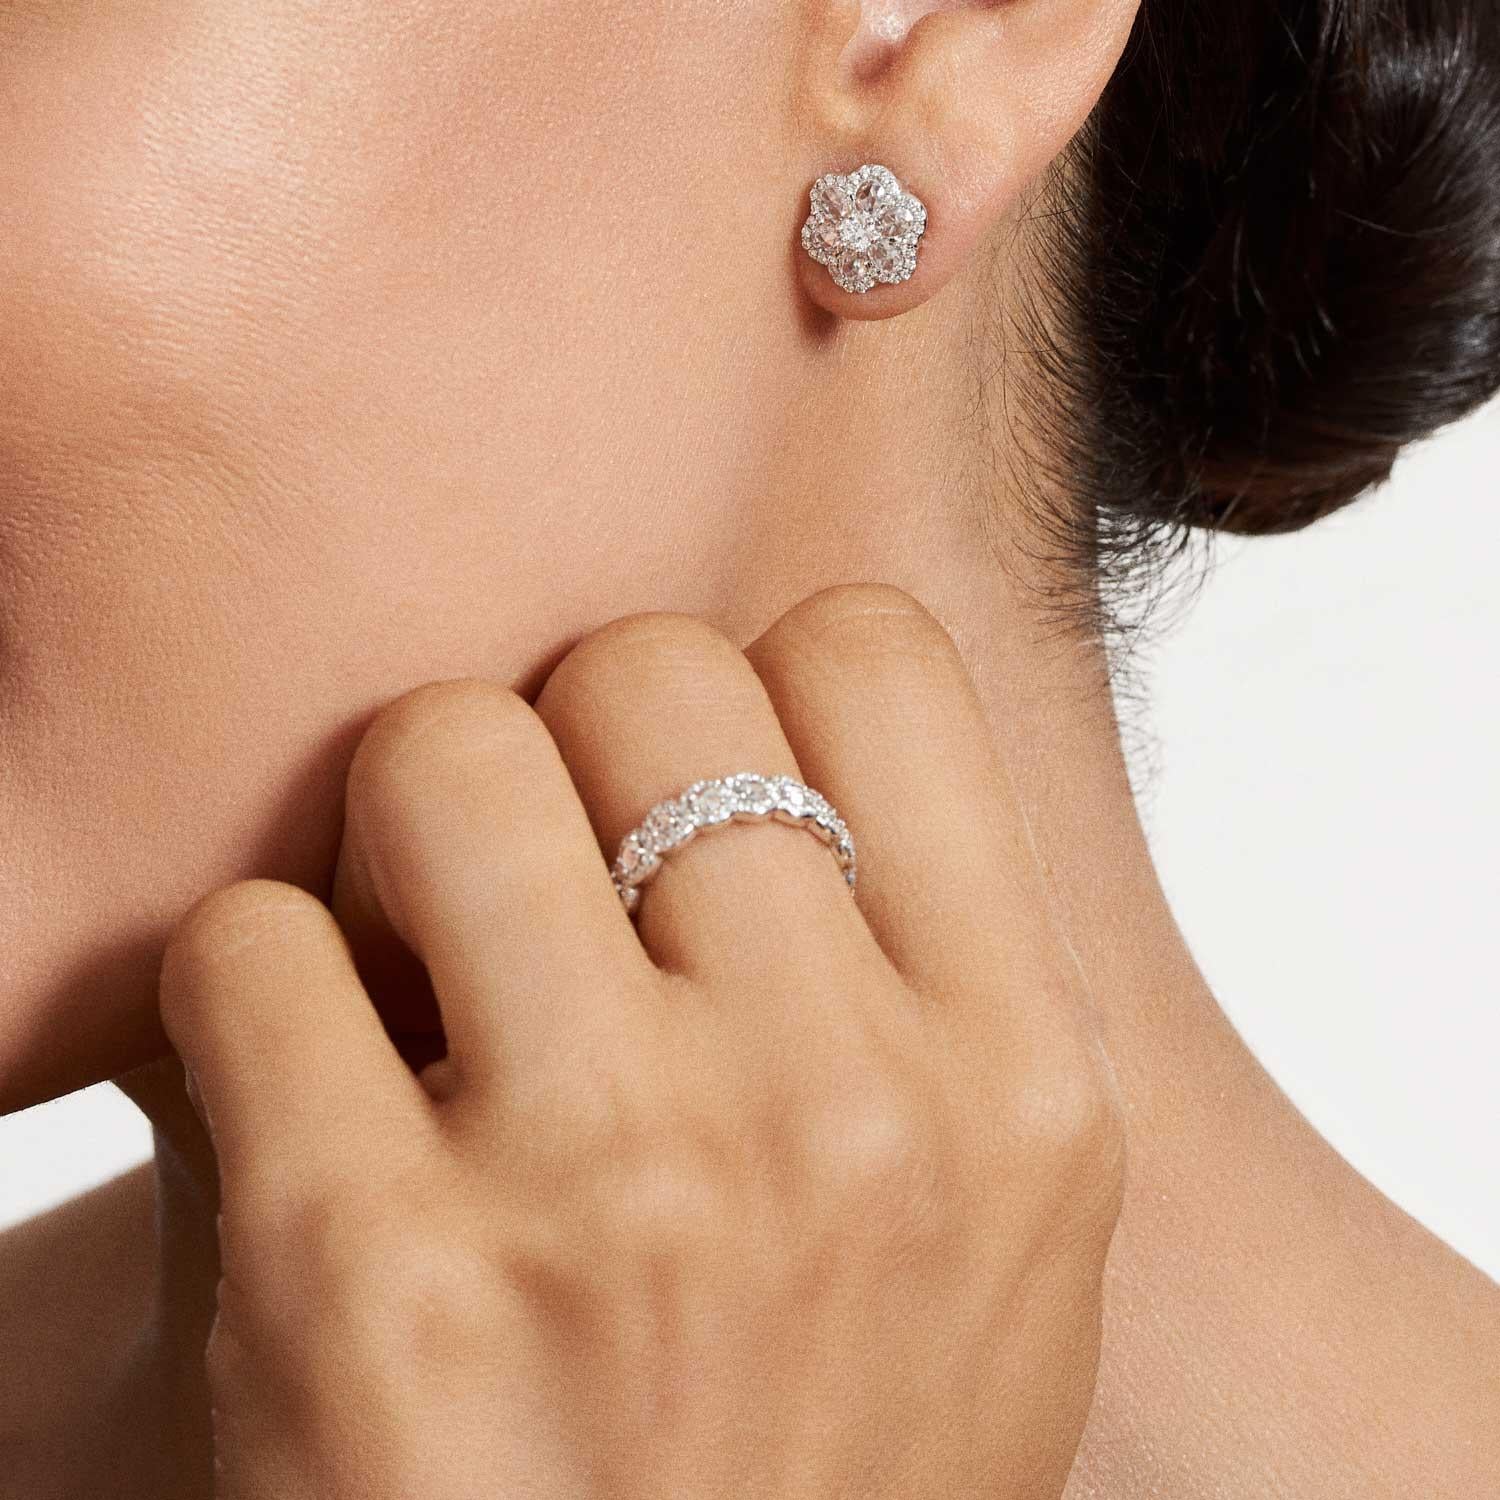 Beautifully feminine, these 1 carat Floral Diamond Stud earrings bring floral inspiration to the everyday. Seven diamonds are accented by smaller brilliant cut diamonds in a micro pave setting to reflect a subtle floral silhouette.

The 0.10 carat